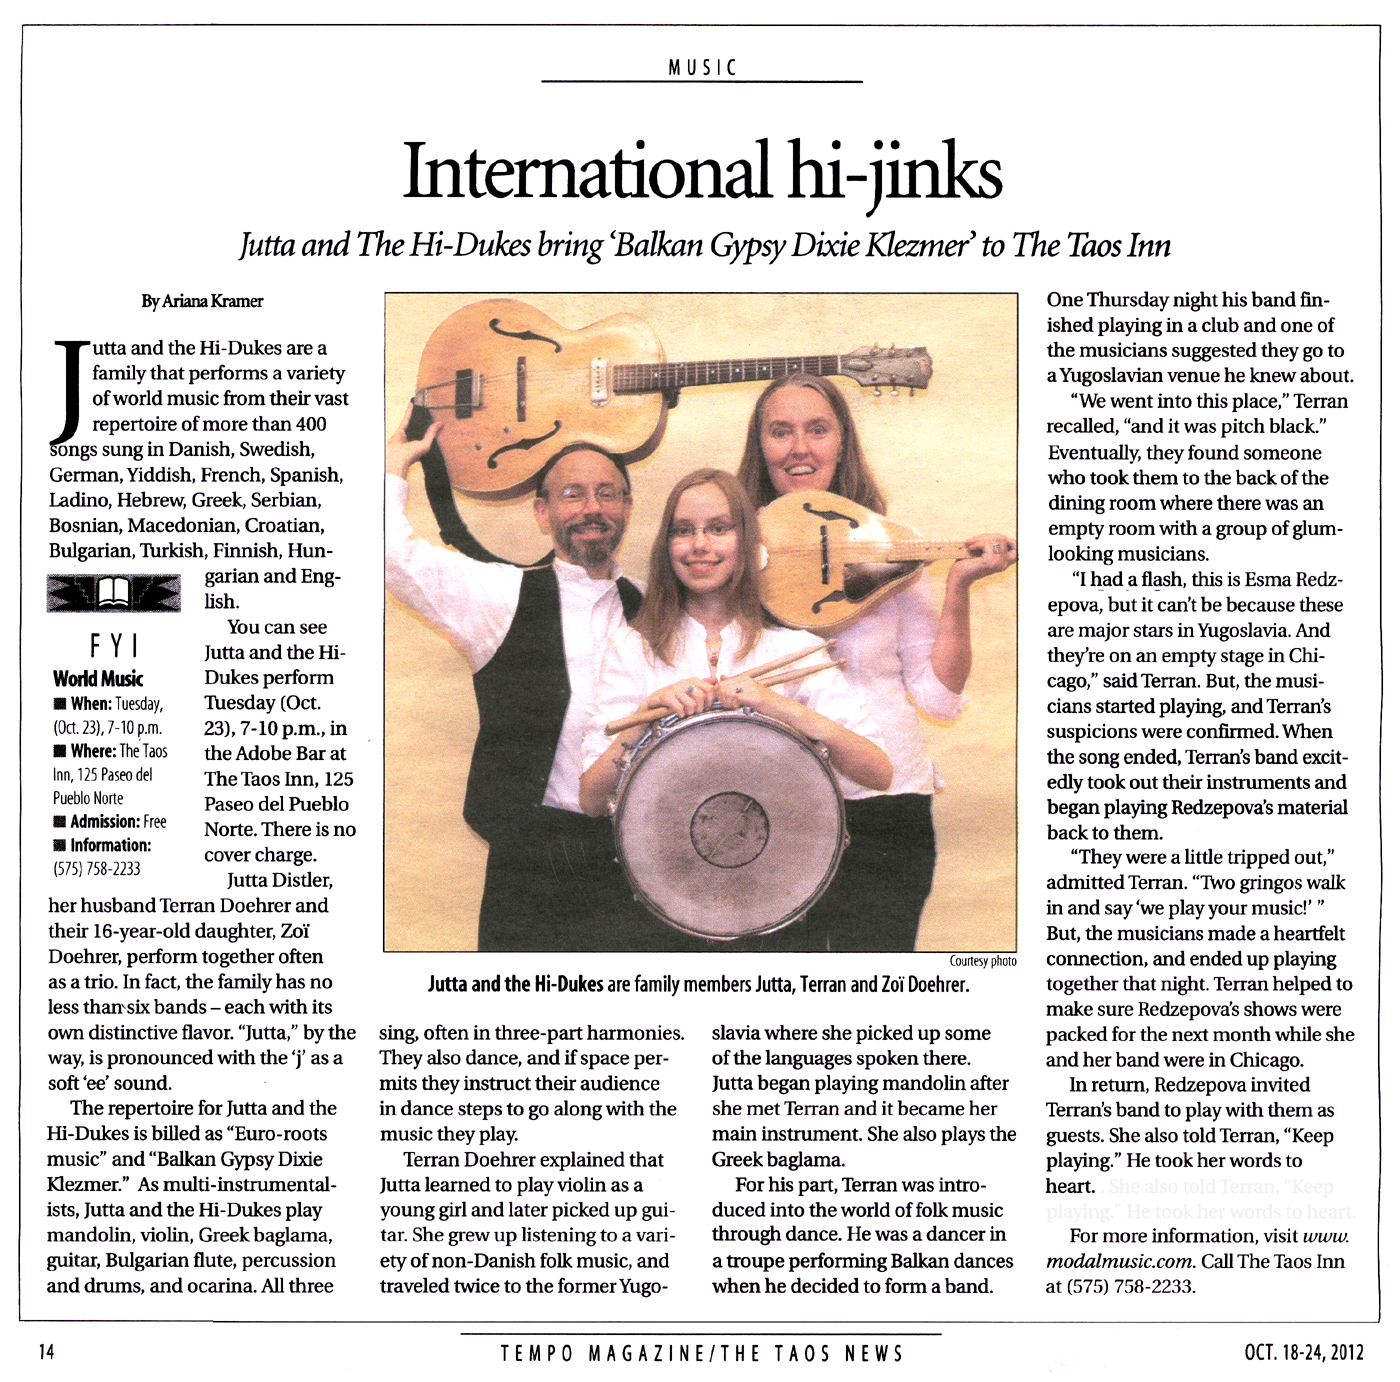 Image of the Taos News Tempo Magazine October 18, 2012 clipping about Jutta & the Hi-Dukes (tm) Design © 2013 Modal Music, Inc. (tm) All rights reserved.